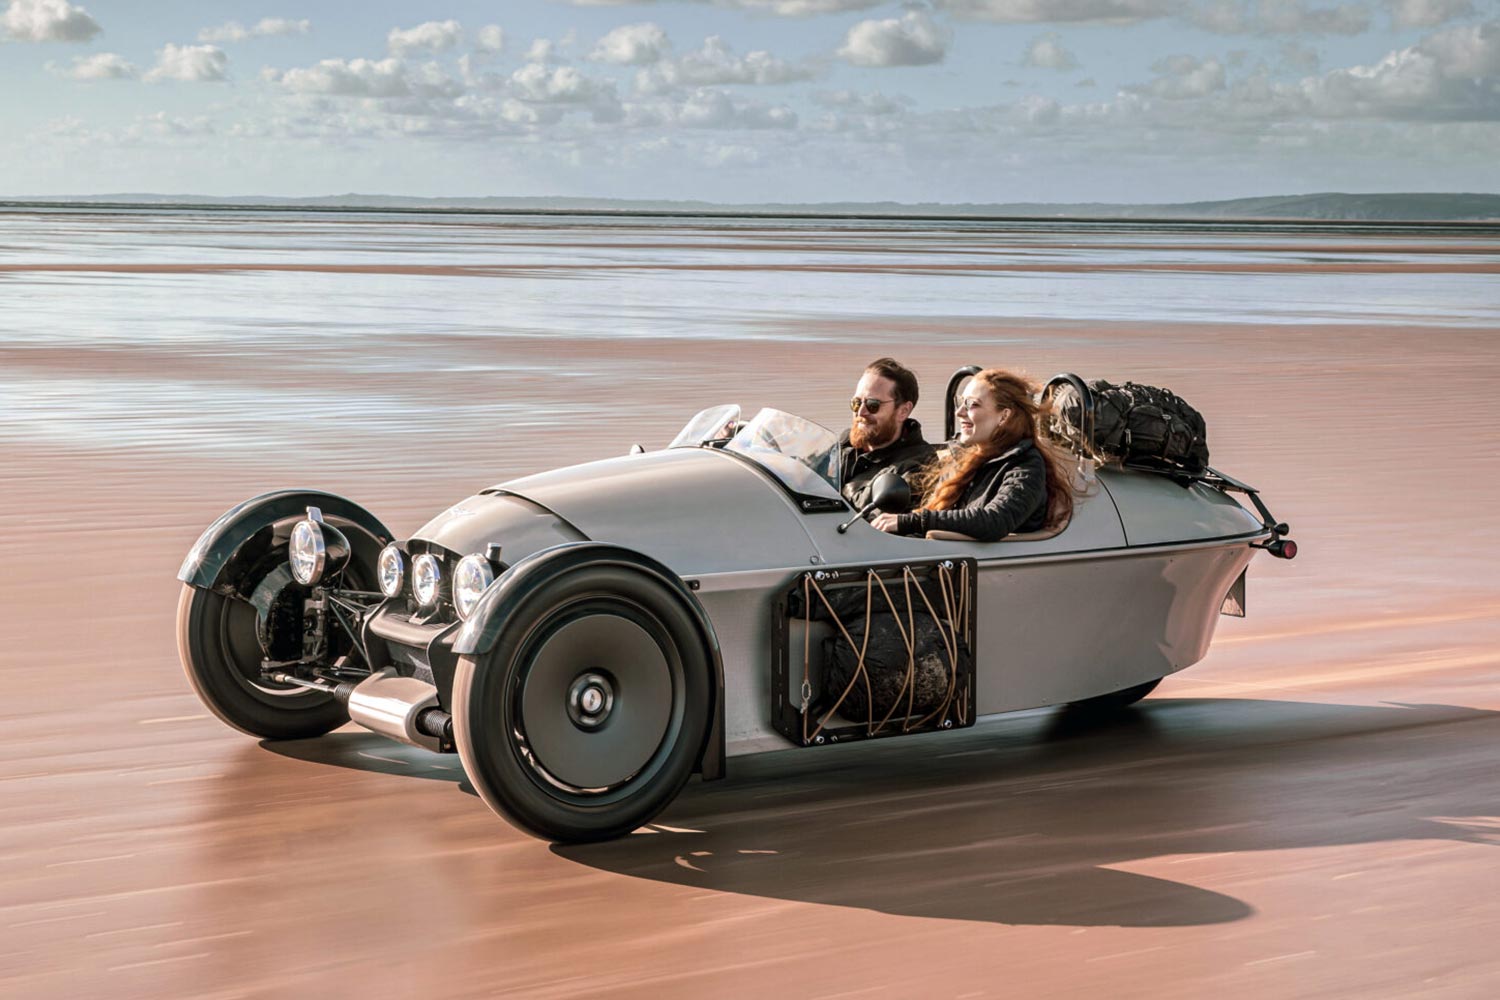 Two people driving in a Morgan Motor Company Super 3 three-wheeled car on the sand